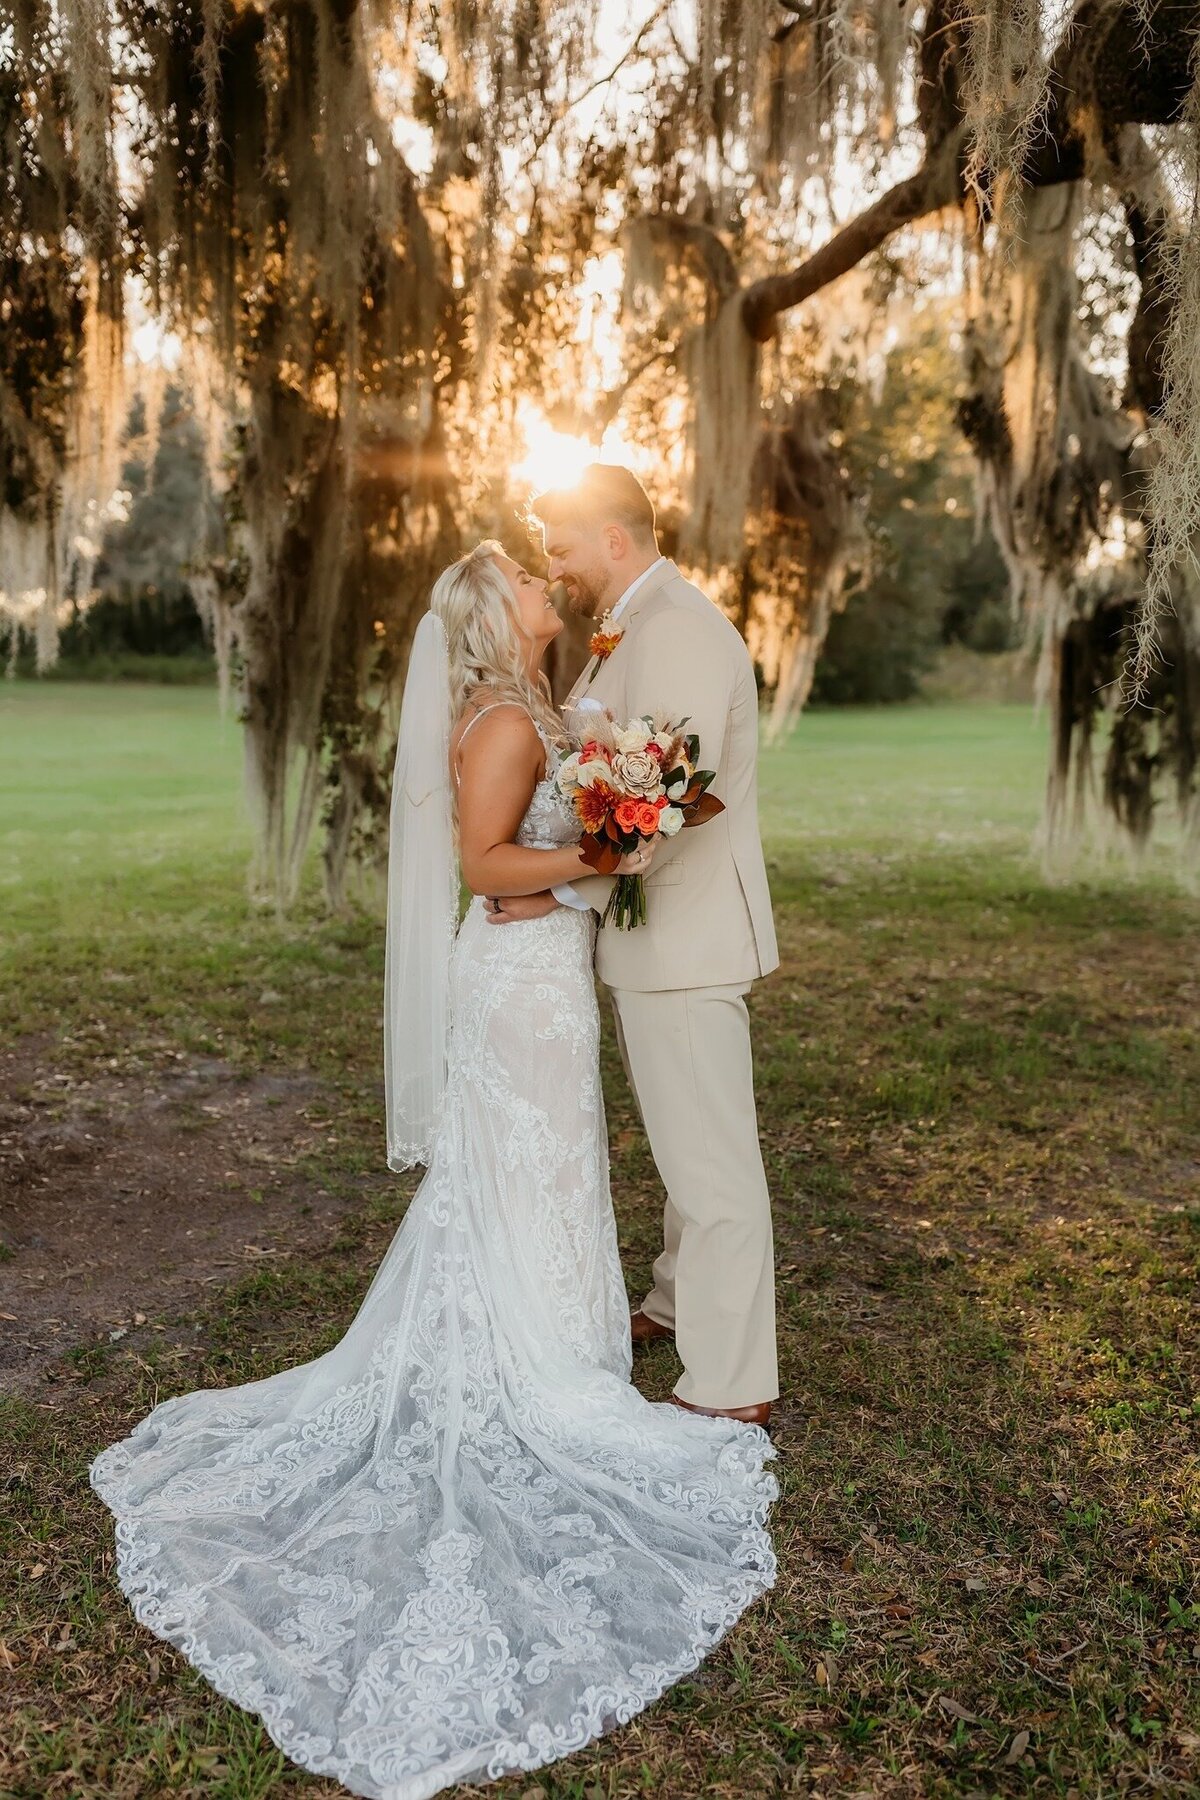 Legacy at Oak Meadows Wedding Venue - Pierson - Gainesville Florida - Weddings and Events42